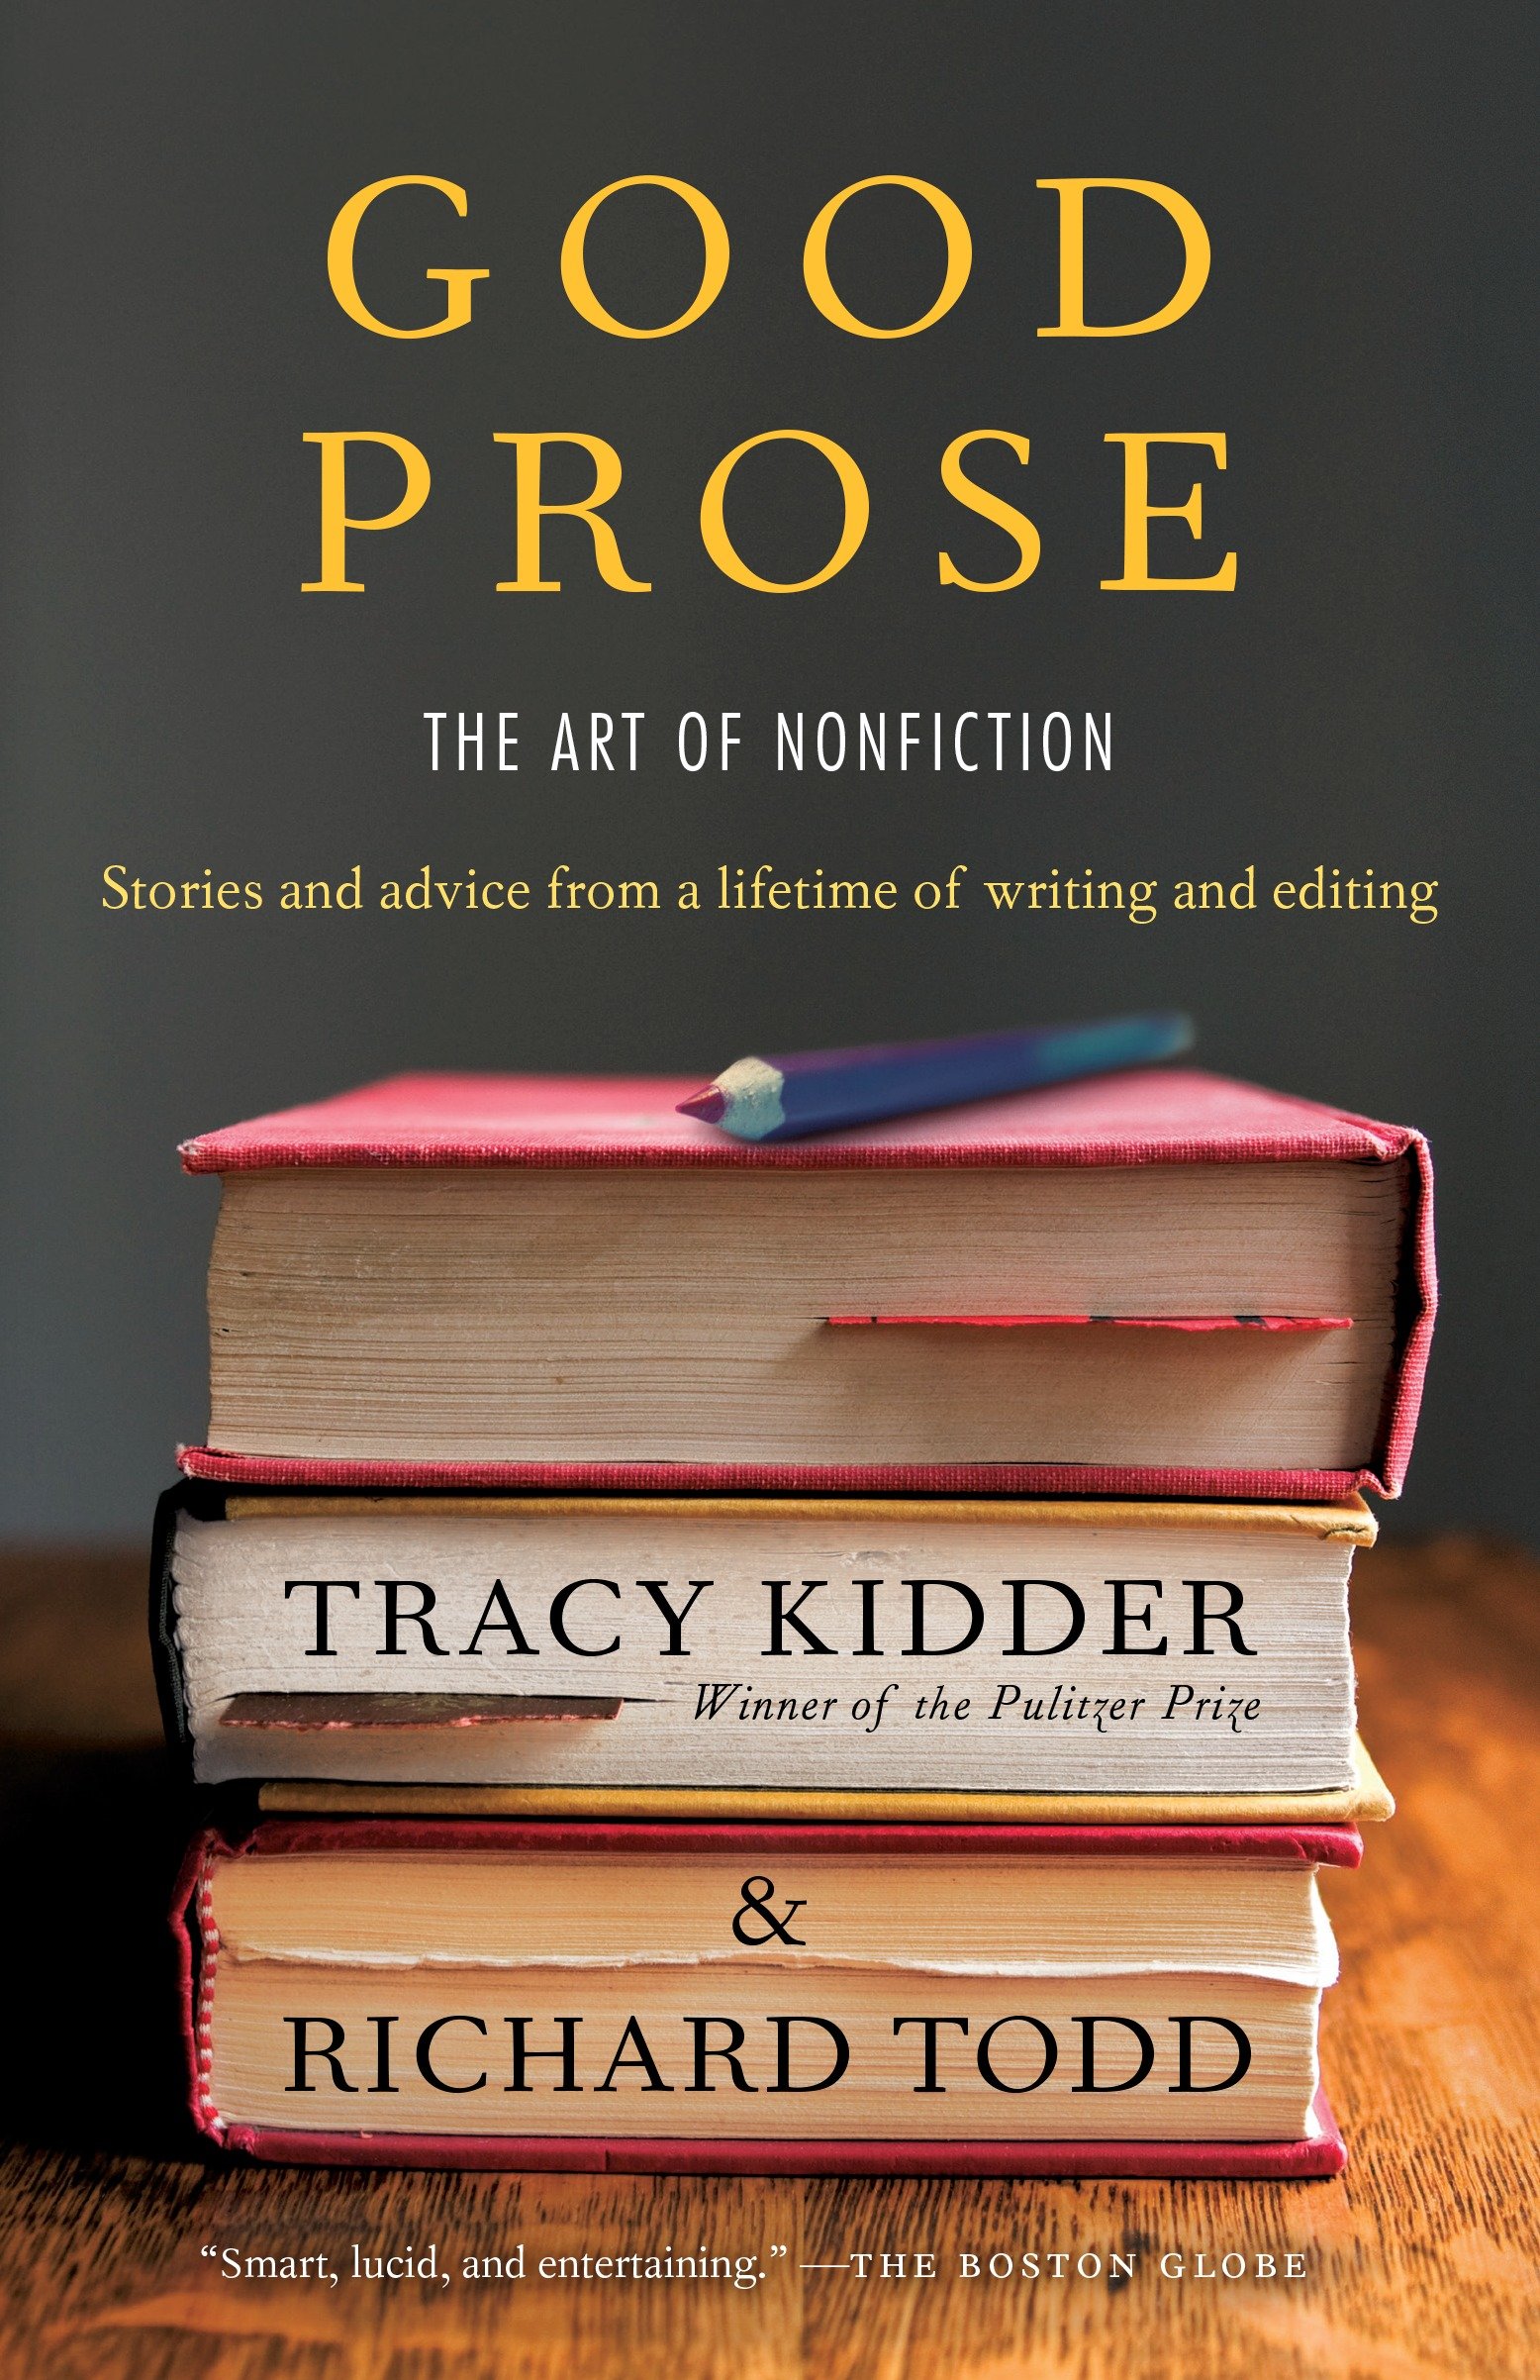 Good prose the art of nonfiction cover image